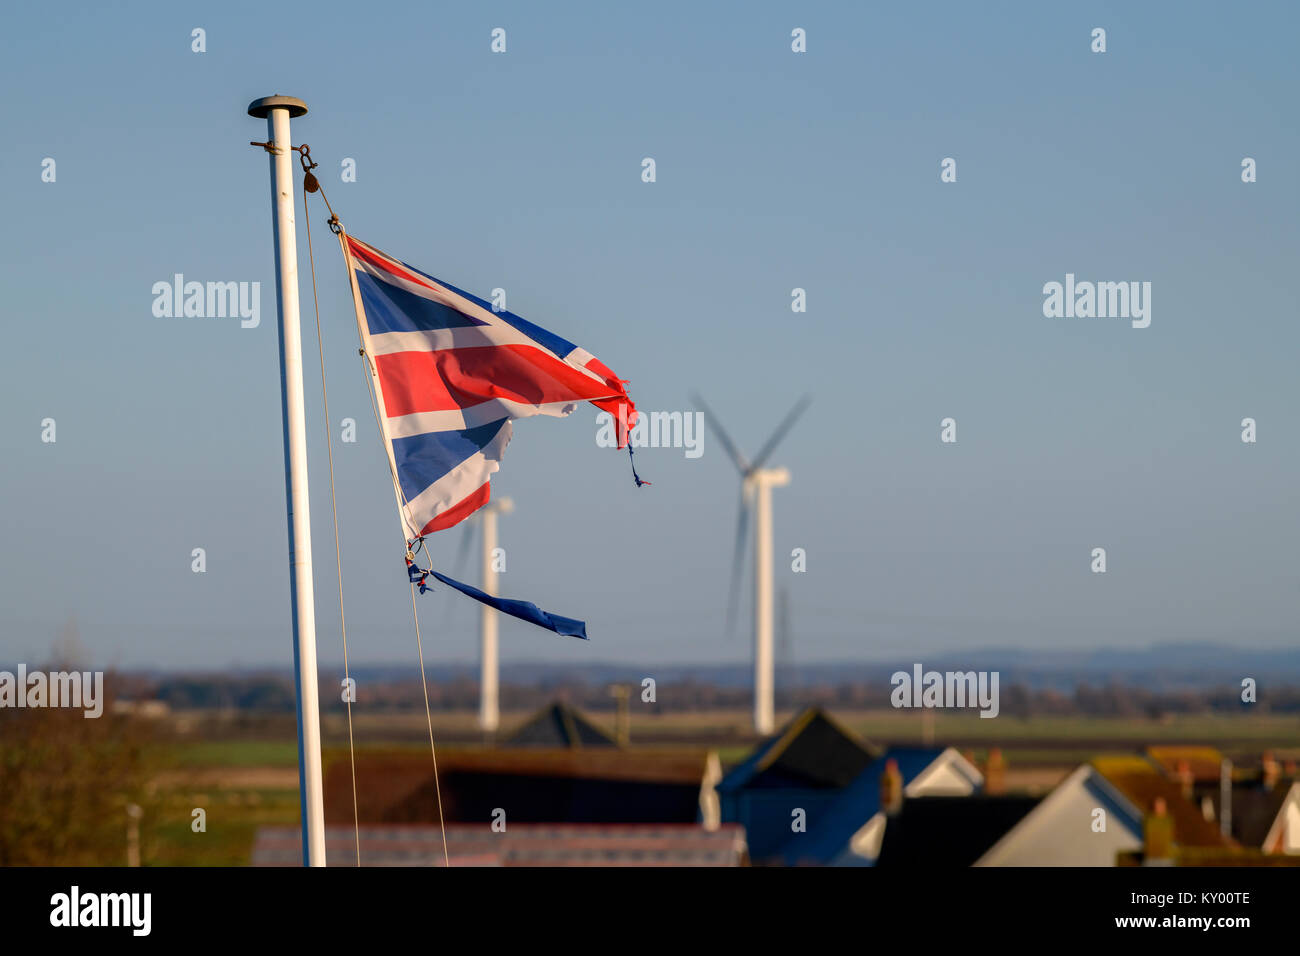 A tattered Union Jack flag fluttering in the wind against a blue sky. Stock Photo